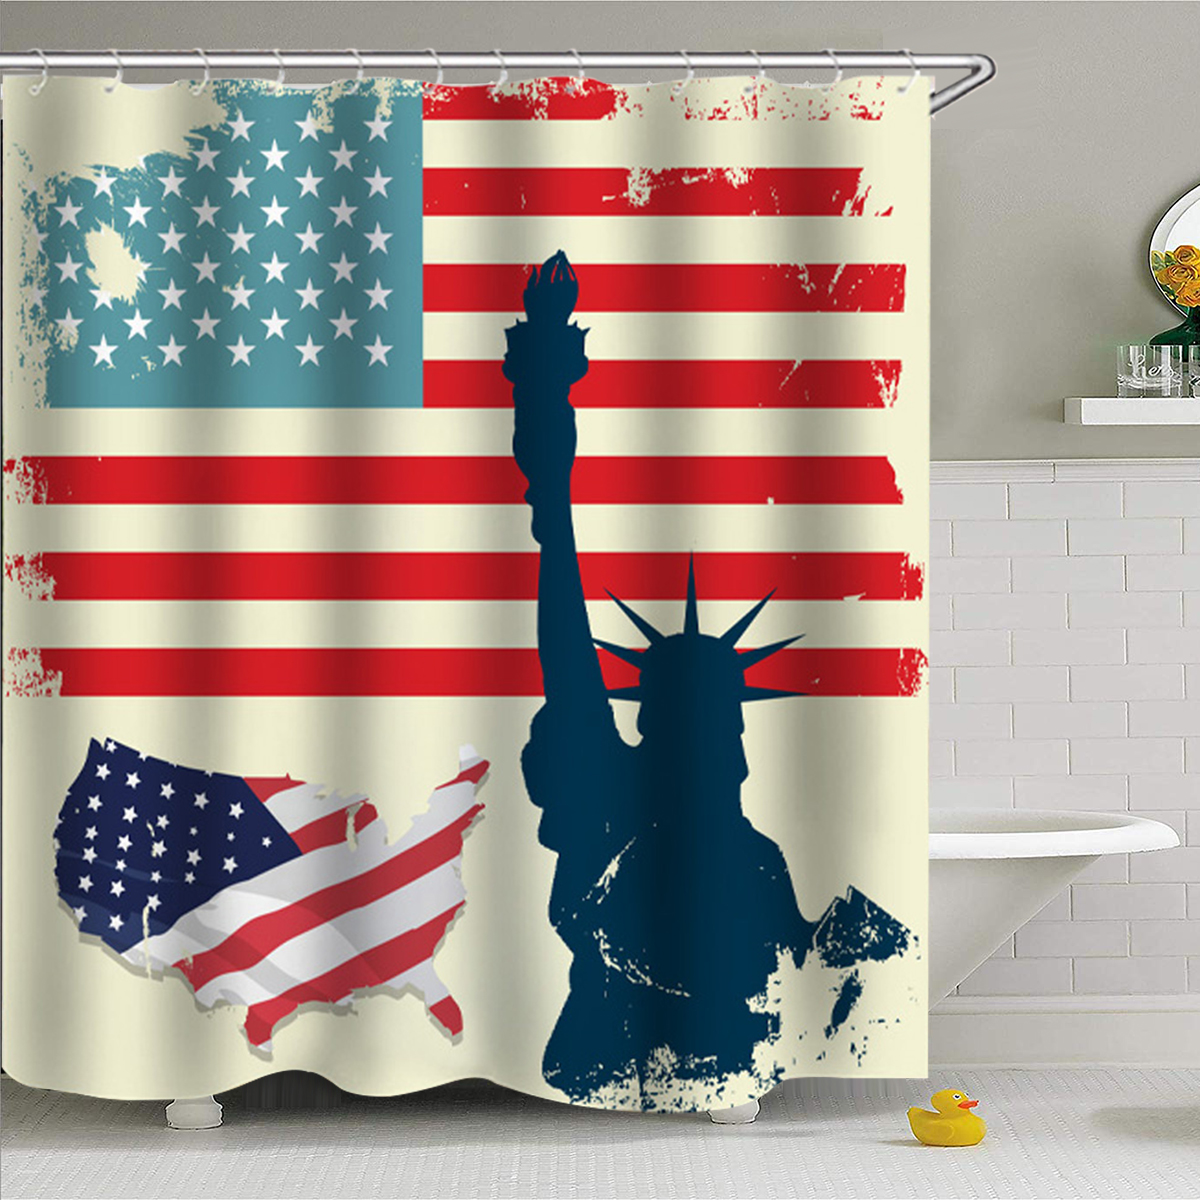 American-Flag-Bathroom-Shower-Curtain-Non-Slip-Rug-Toilet-Lid-Cover-Bath-Mat-with-12-Ring-1425088